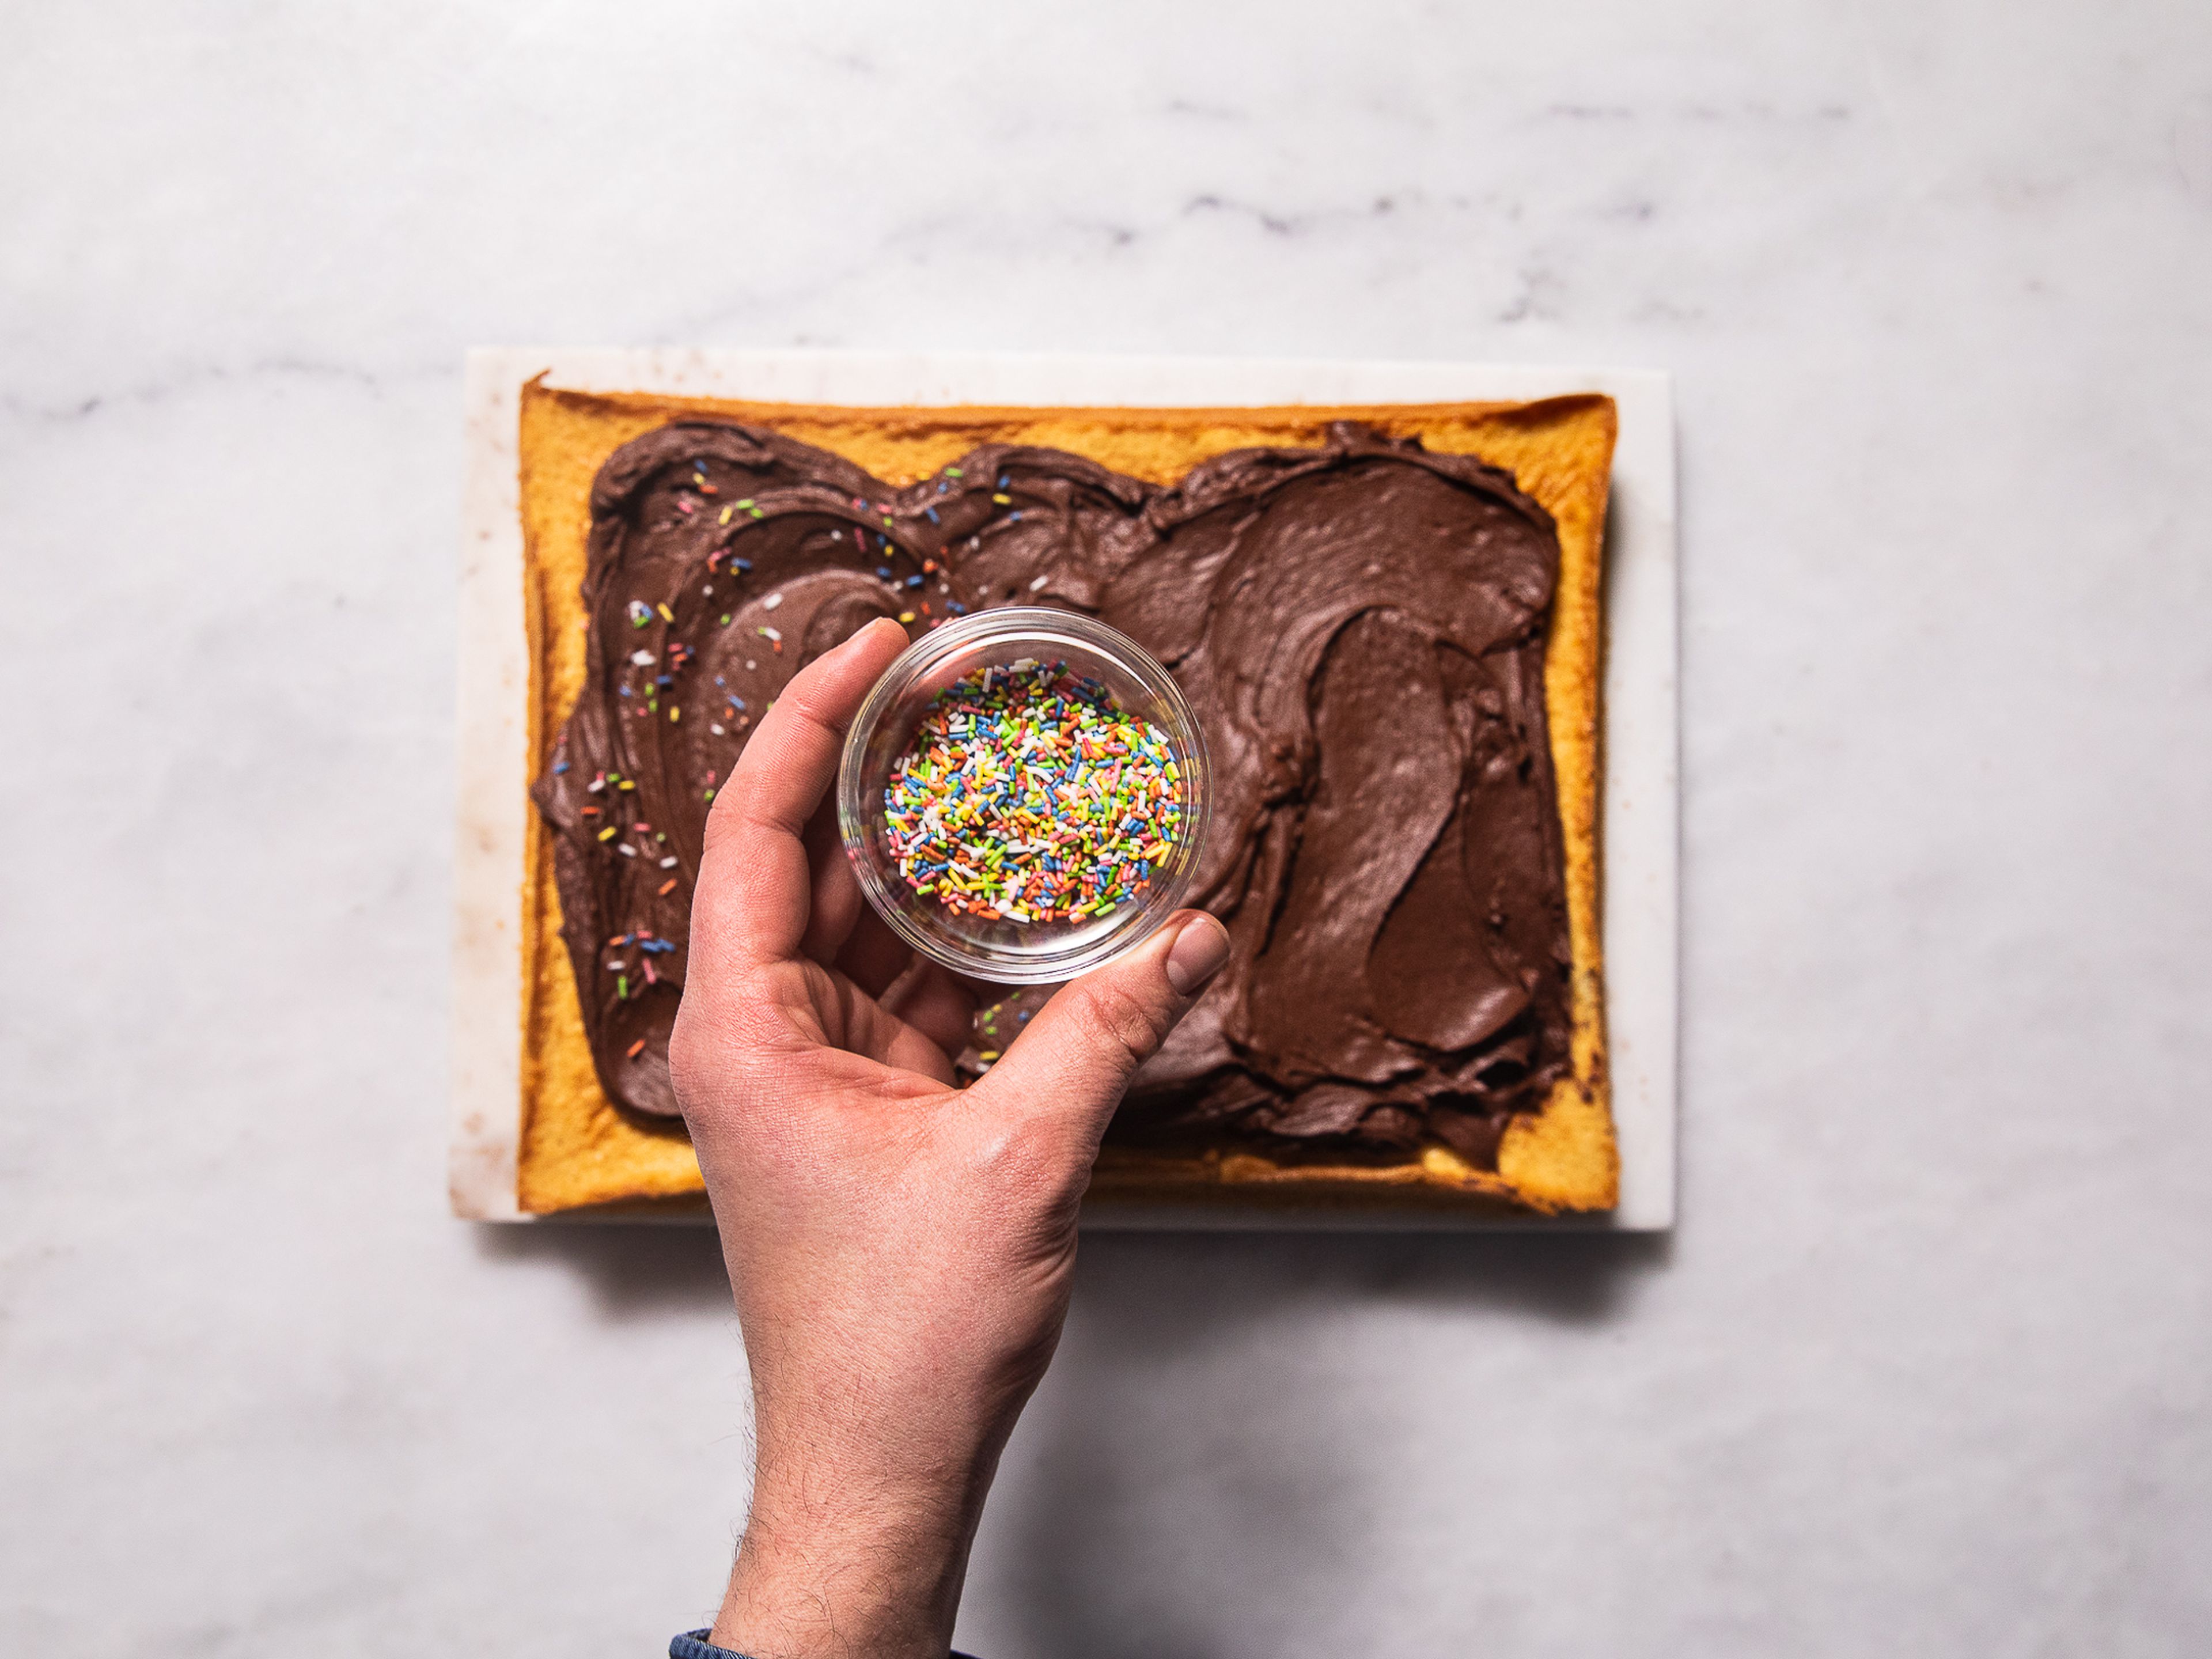 Spread the chocolate frosting over the cooled cake and decorate with sprinkles, if desired. Slice and enjoy!